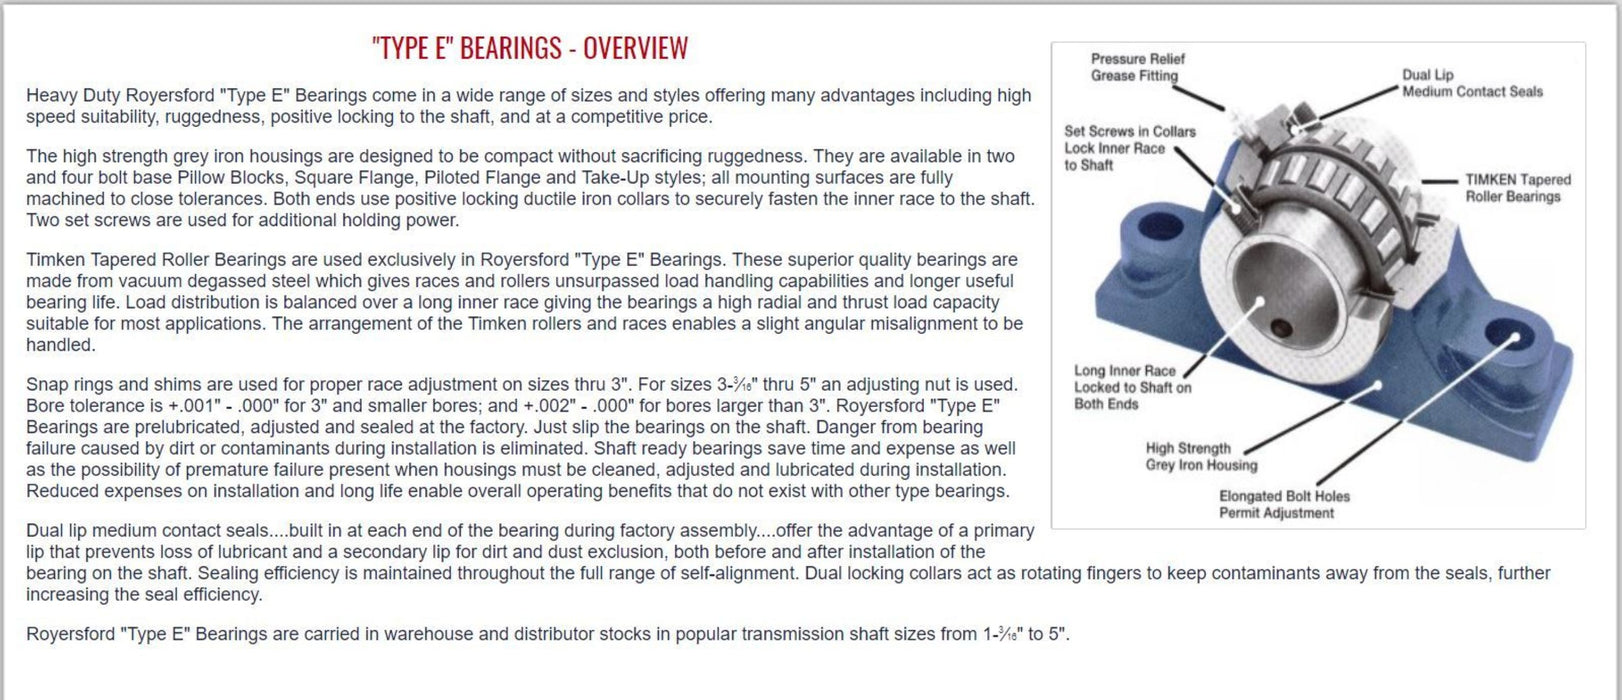 20-05-0304, Royersford Type E 4 Bolt Square Flange Bearing, 3-1/4" with Timken Tapered Roller Bearings